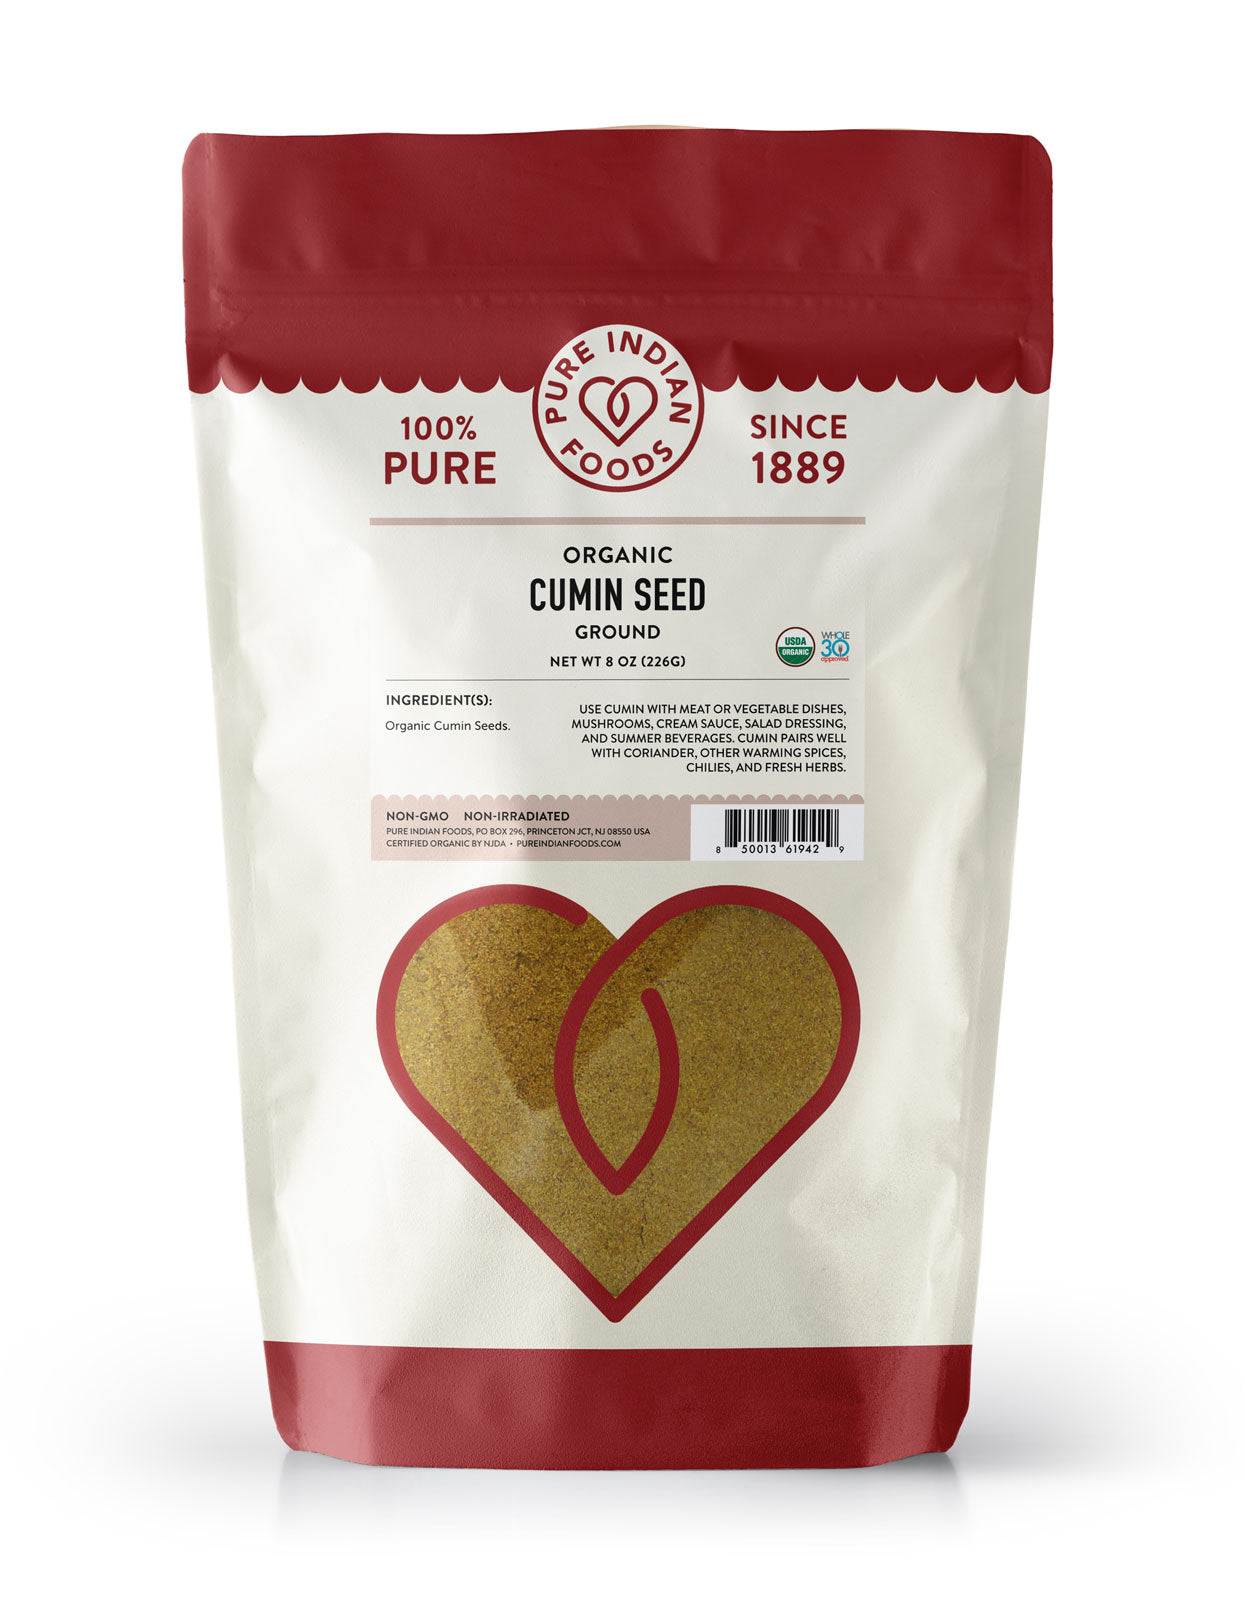 Large package of jeera powder from Pure Indian Foods, also known as organic cumin powder.